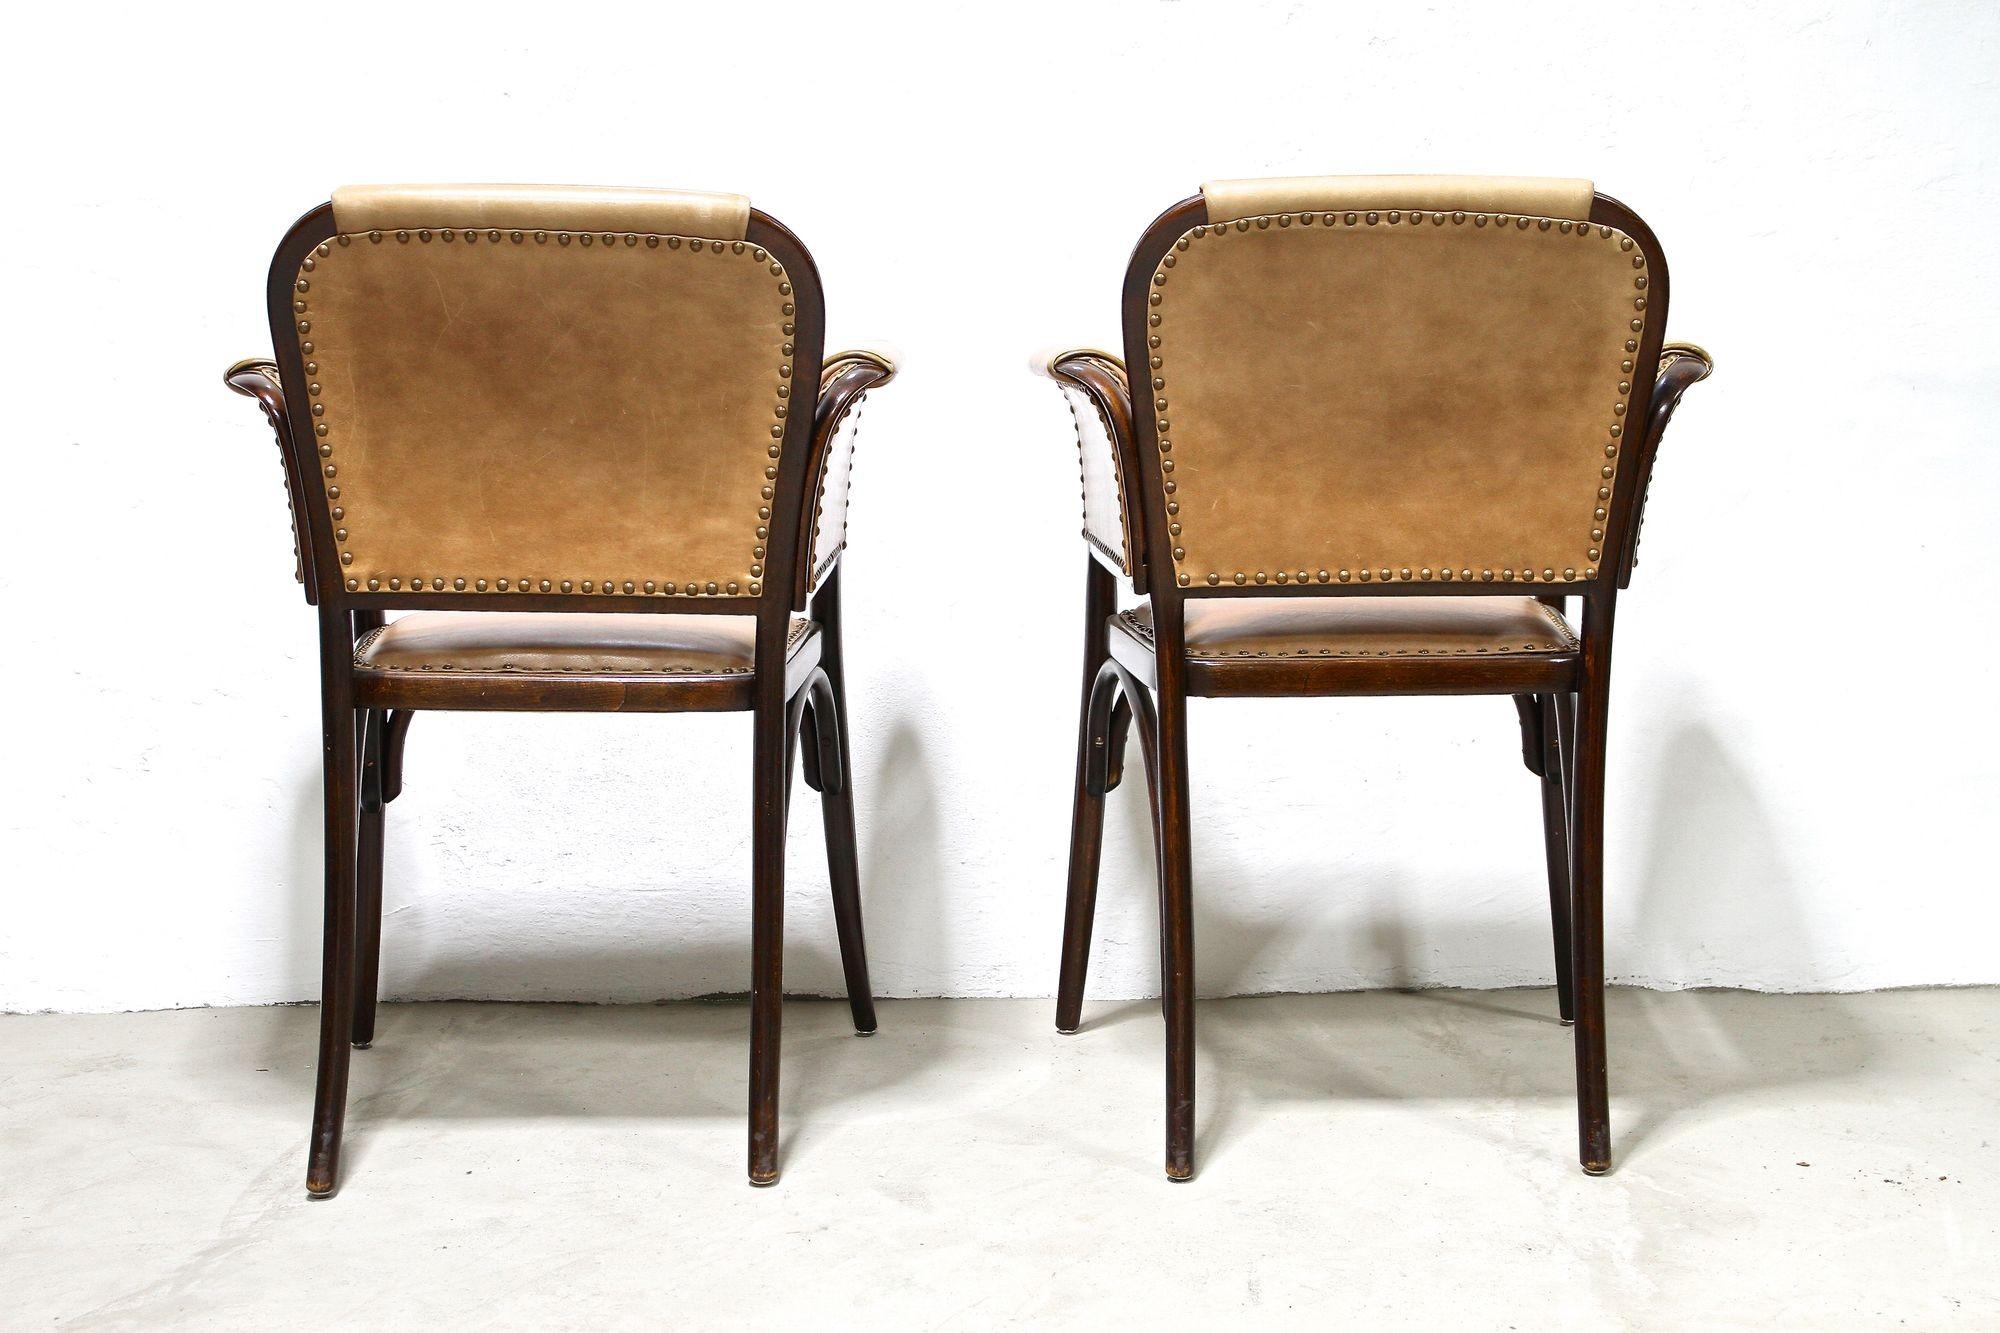 Pair of 20th Century Art Nouveau Bentwood Armchairs by Thonet, Austria, Ca. 1904 For Sale 2